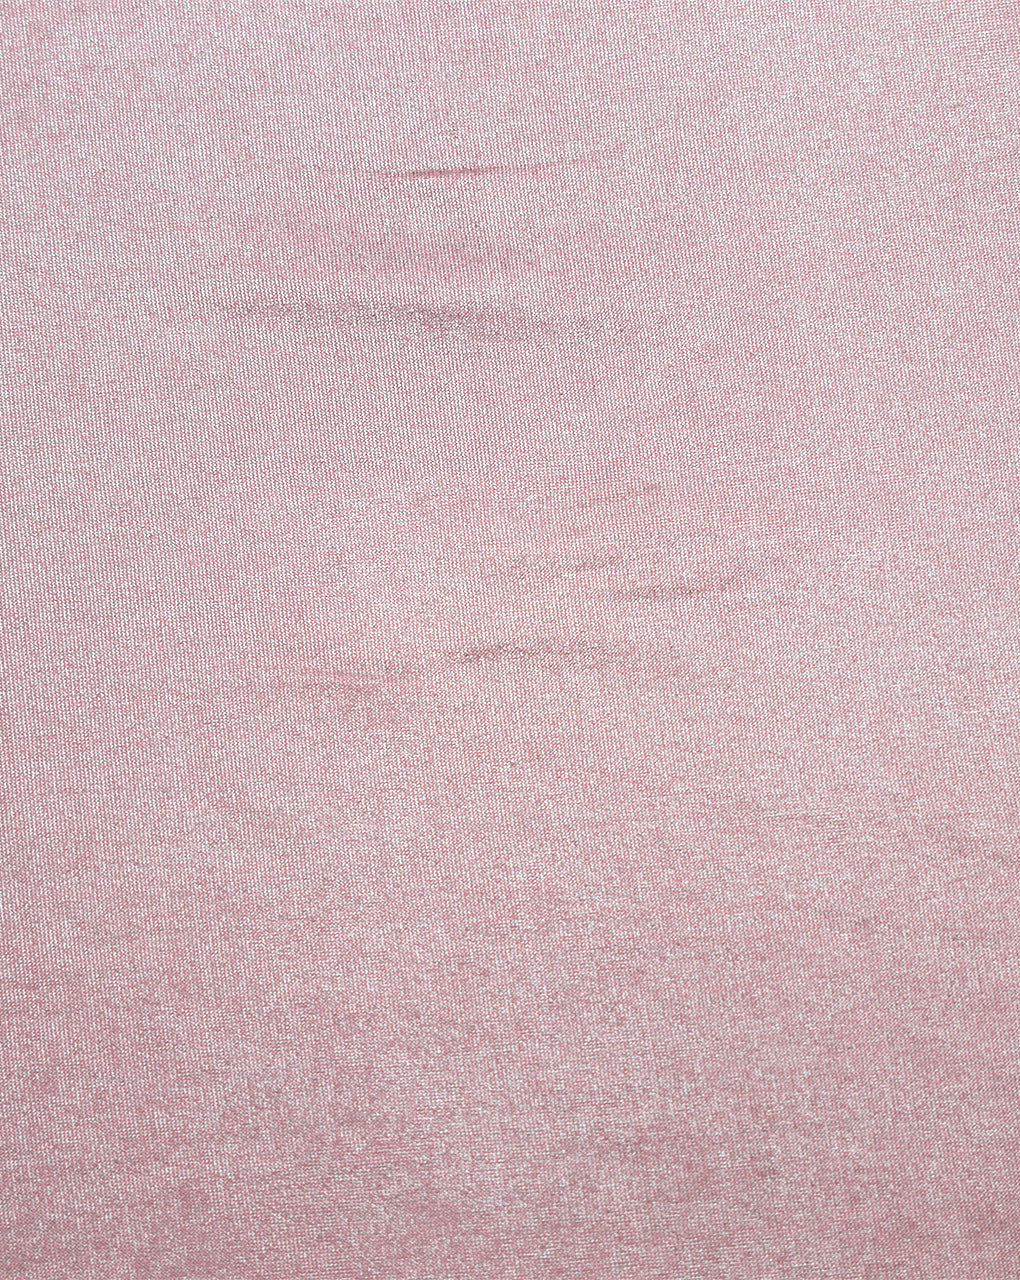 BABY PINK POLYESTER KNITTED FOIL FABRIC